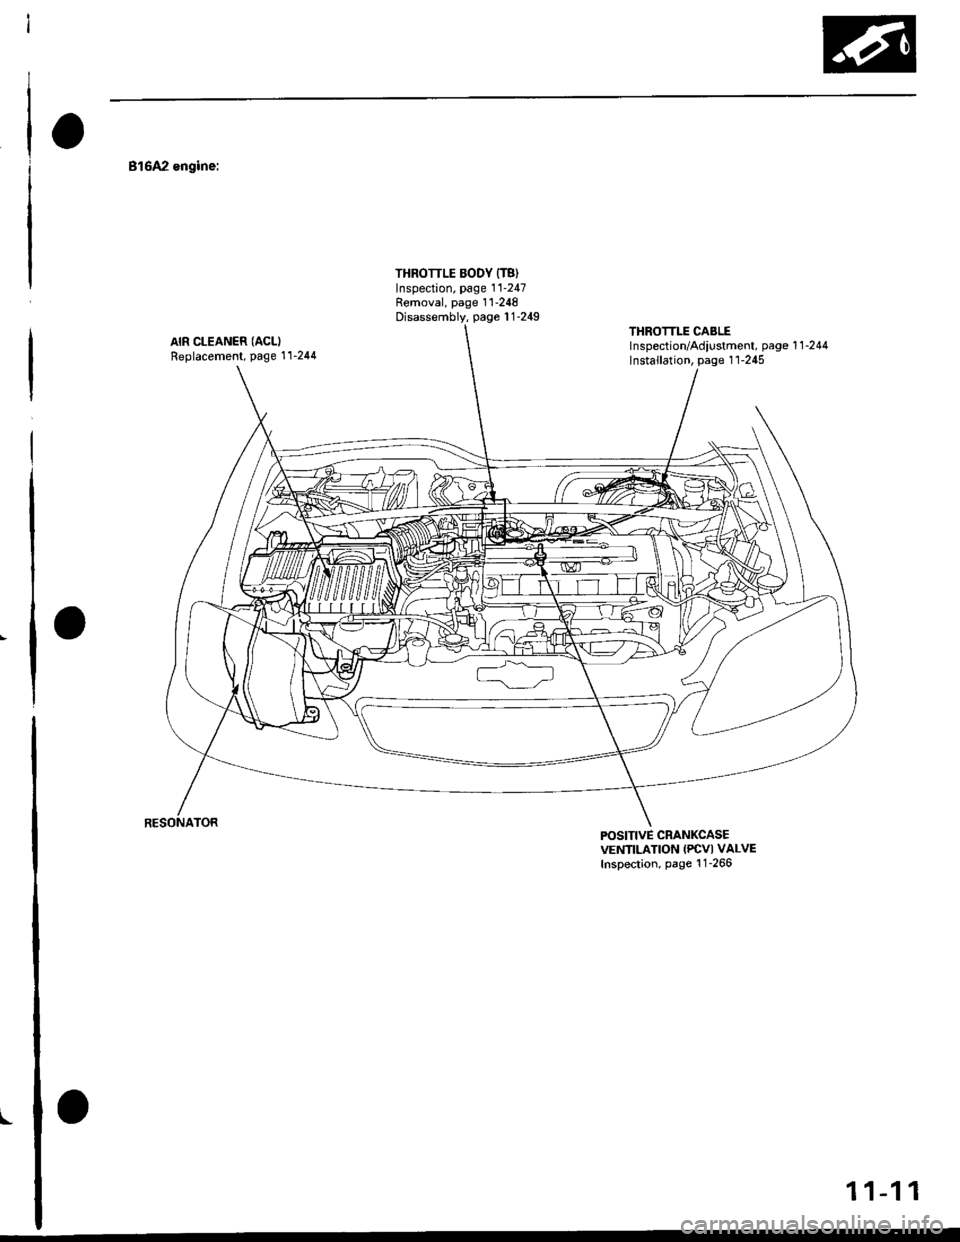 HONDA CIVIC 1997 6.G Workshop Manual \-
816A2 engine:
AIR CLEANER (ACLI
Replacement, Page 11-244
THROTTLE BODY {T8)Inspection. page 11-247Removal, page 1 1-248
Disassembly, page 1 1-249THROTTLE CABLElnspection/Adiustment, page 1 1 -244
